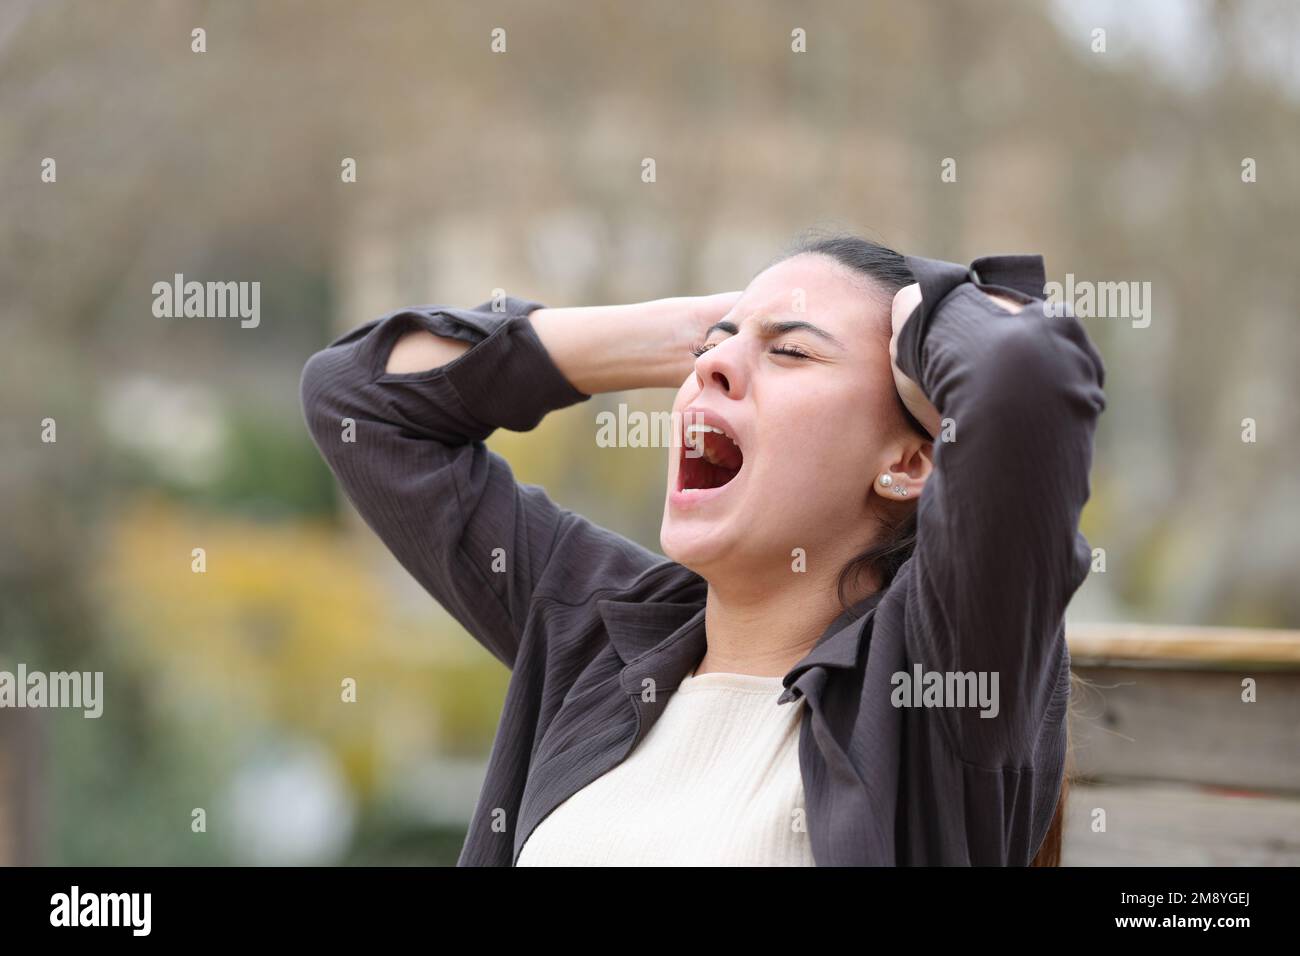 Desperate woman yelling alone standing in a park Stock Photo